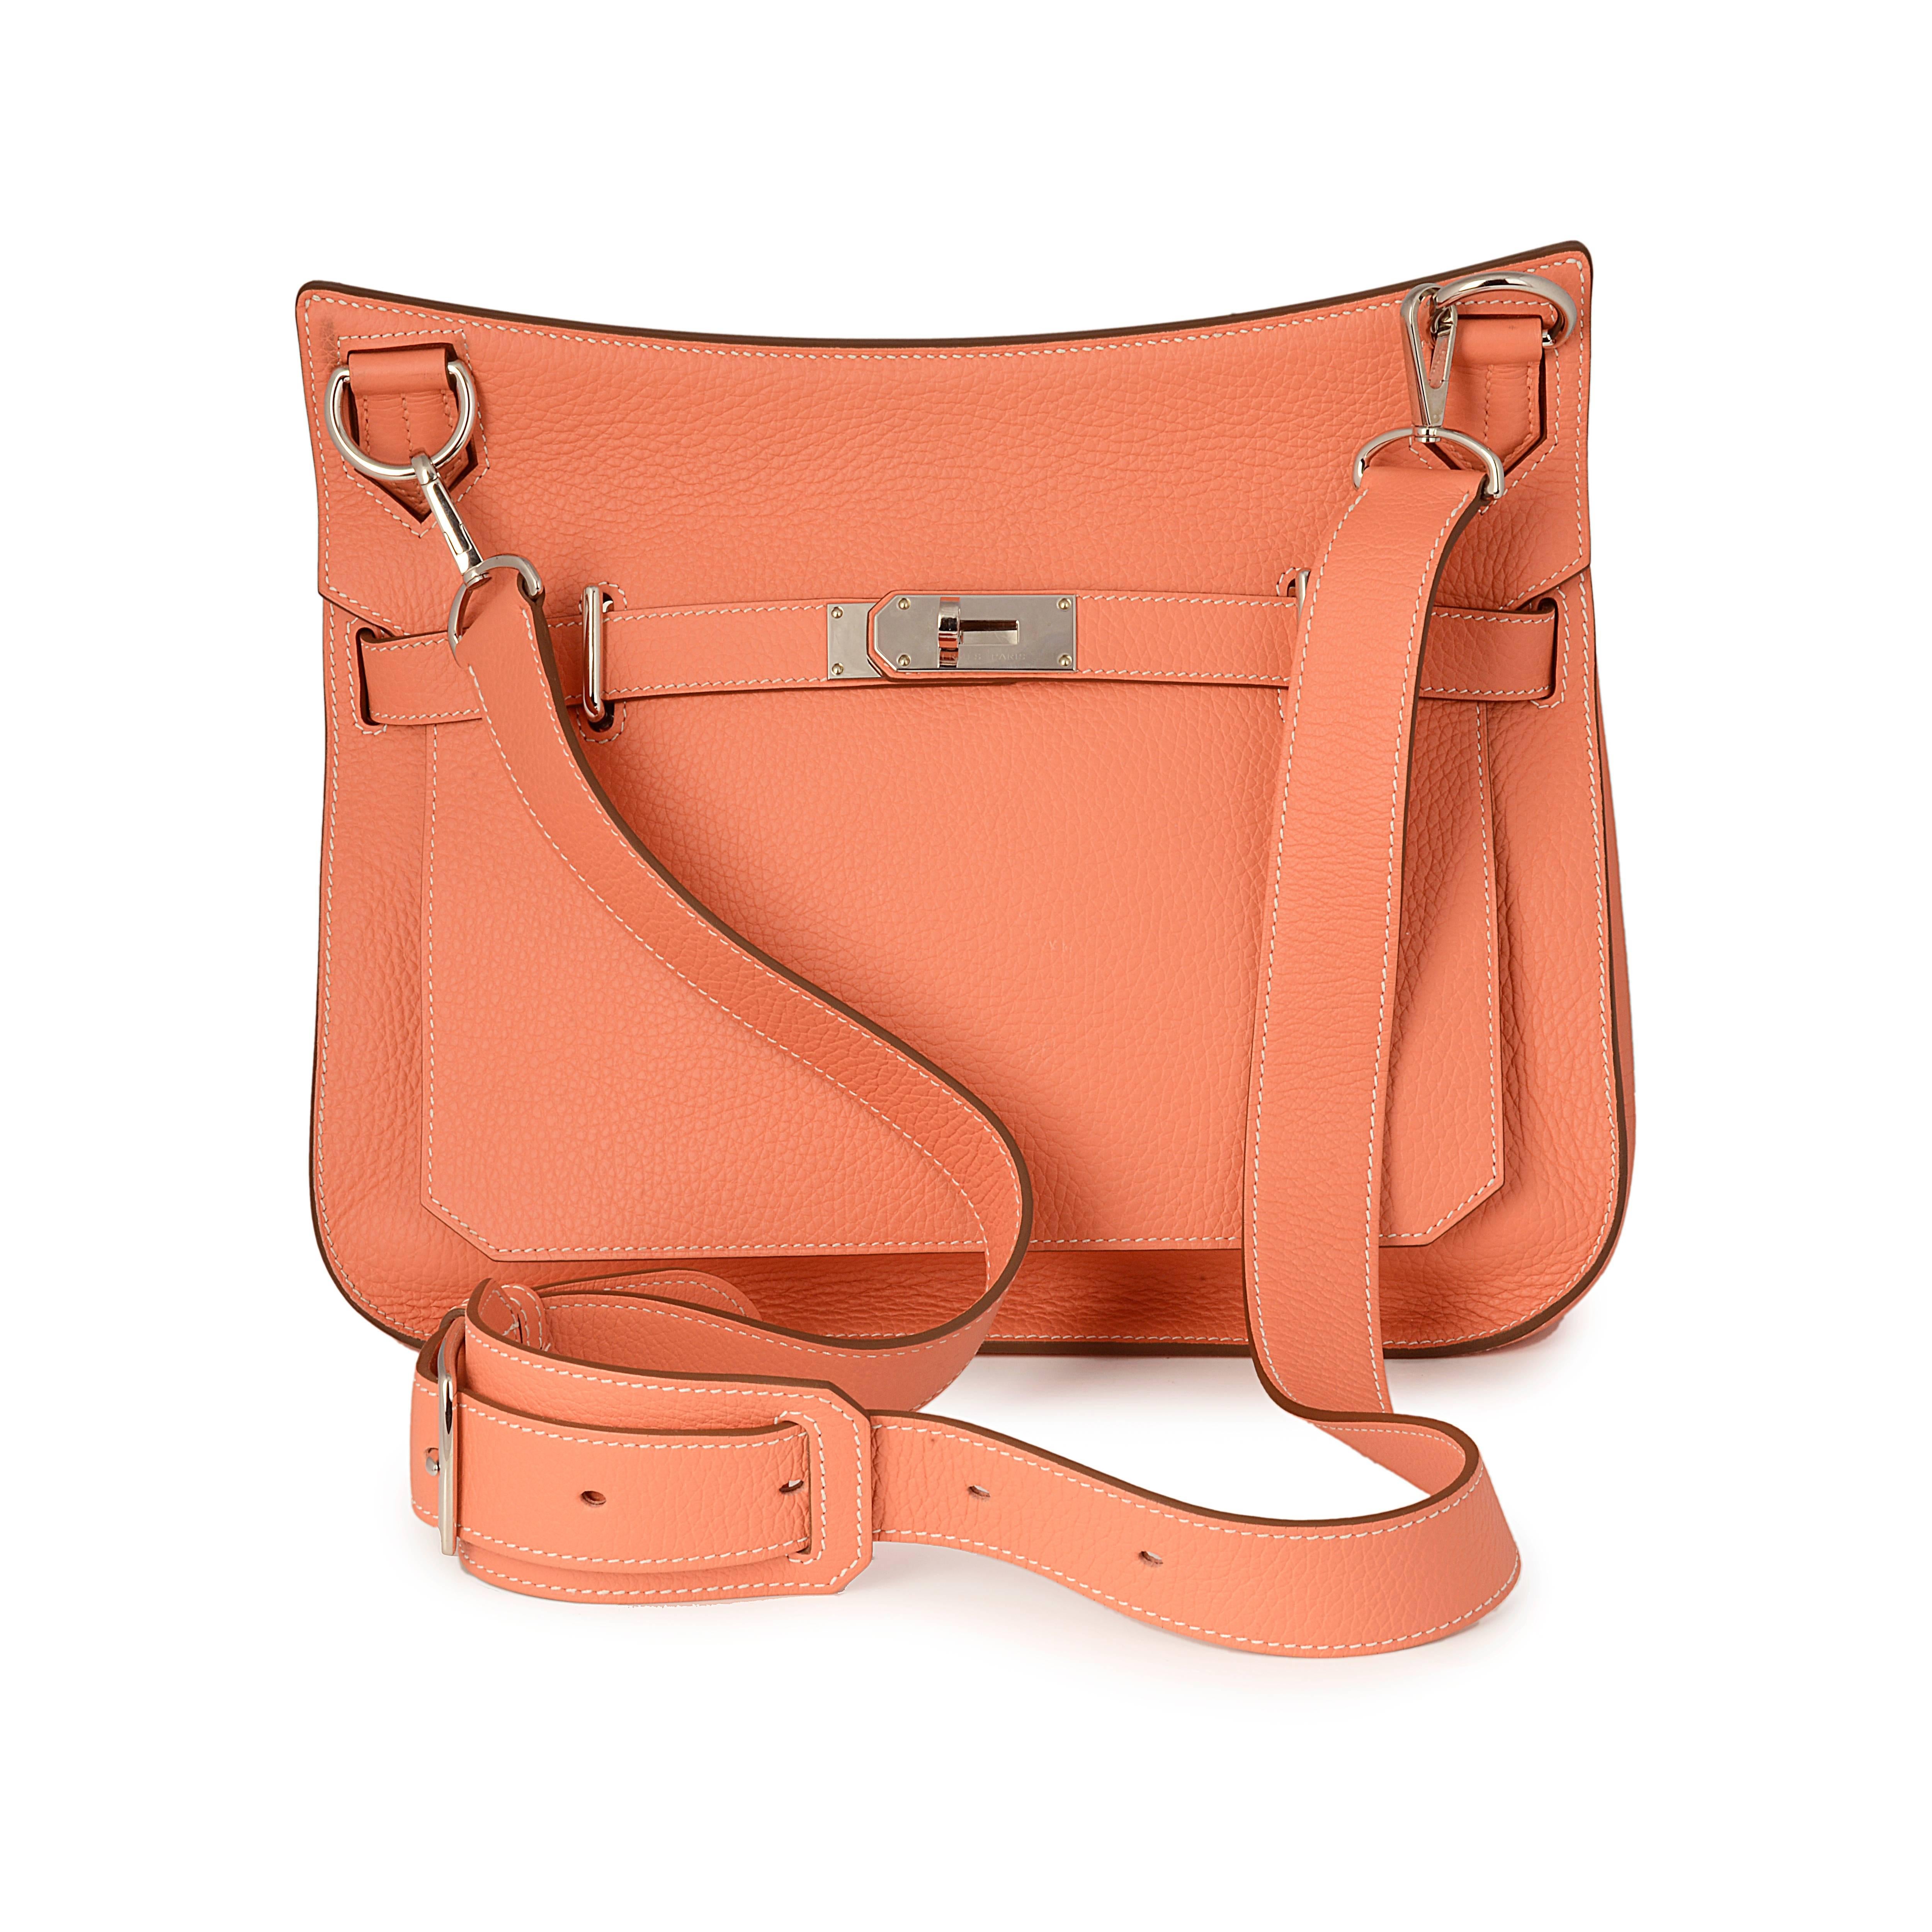 This luxurious Hermes messenger bag is crafted from Clemence leather featuring a front flap closure with the iconic Hermes turn-lock clasp closure and palladium hardware accents. This opens to a roomy coral leather-lined interior with front zip